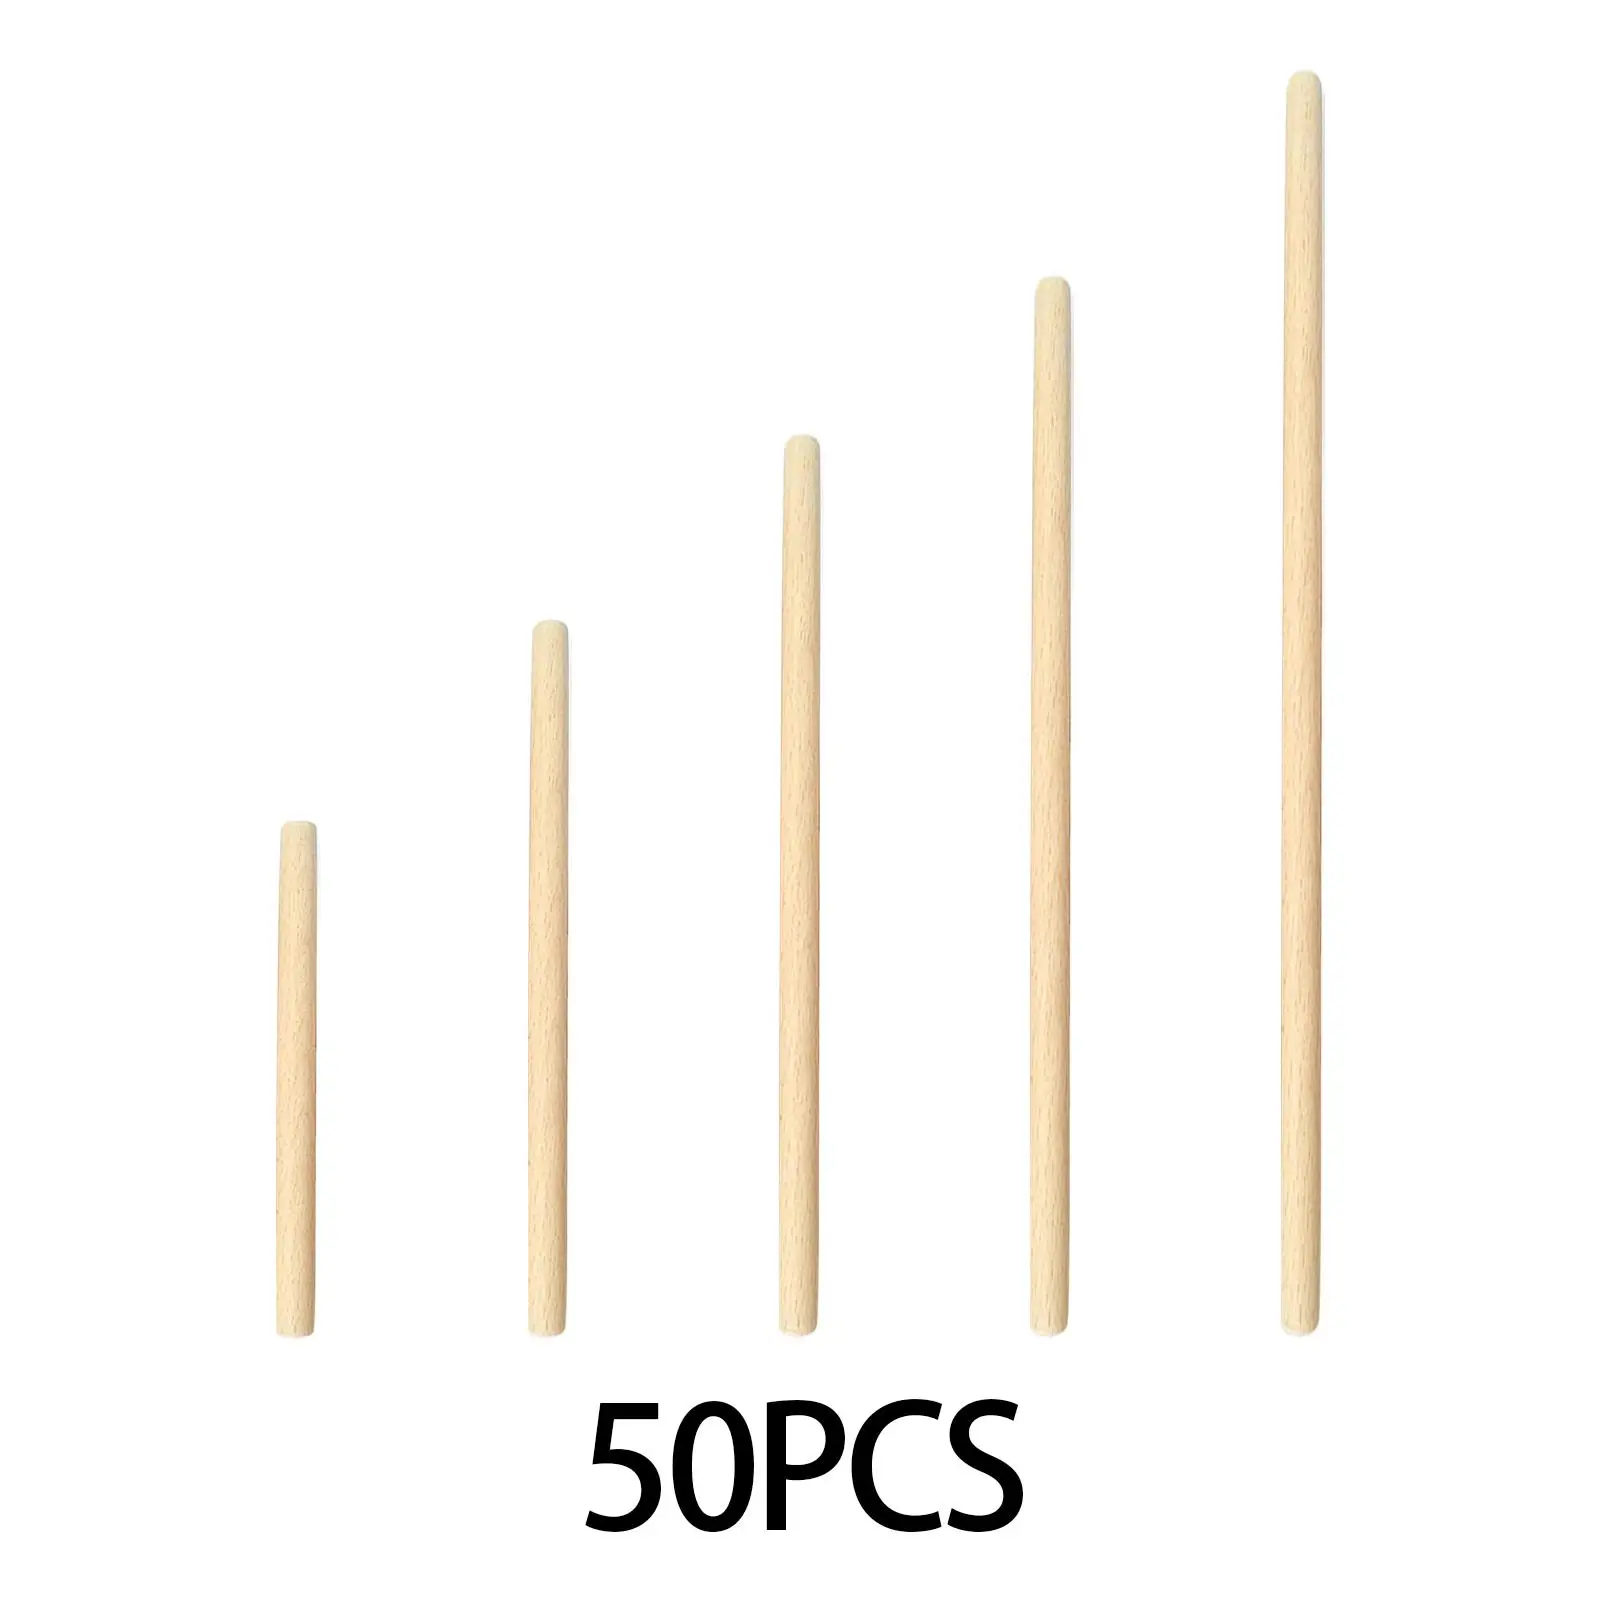 50 Pieces Doweling Rods Unfinished Round Wood Sticks for Building Model Macrame Home Garden Decoration Art Projects